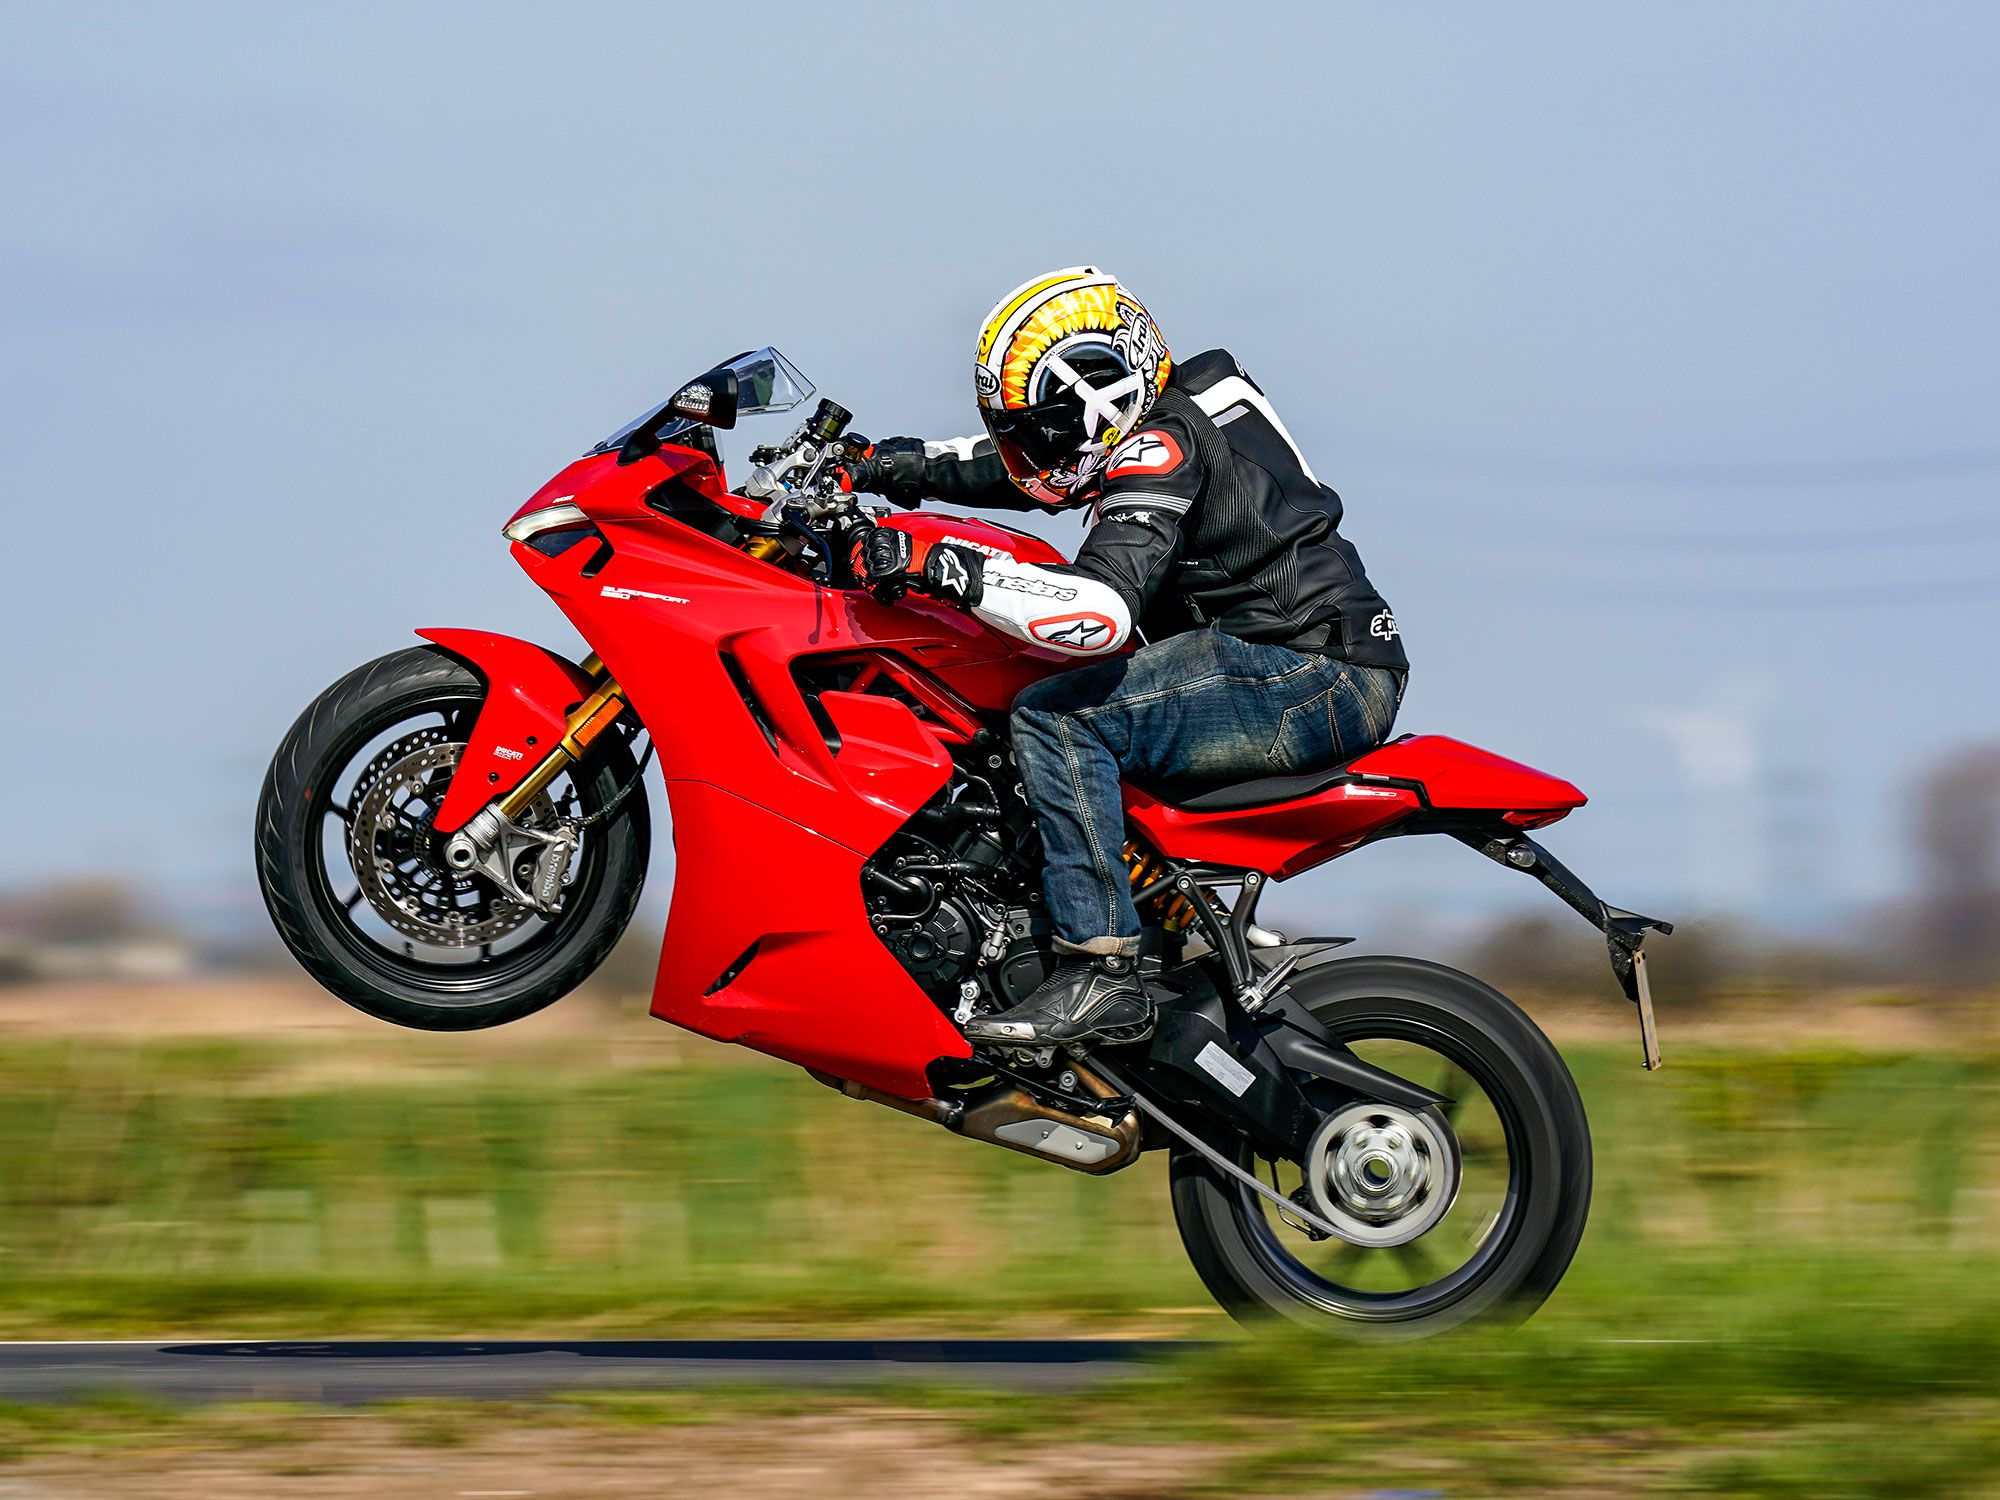 The L-twin desmodromic engine is now Euro 5 compliant, and Ducati claims it hasn't mislaid any power of torque in the process. Peak power is 110 bhp at 9,000 rpm, with peak torque at 69 pound feet at 6,500 rpm.